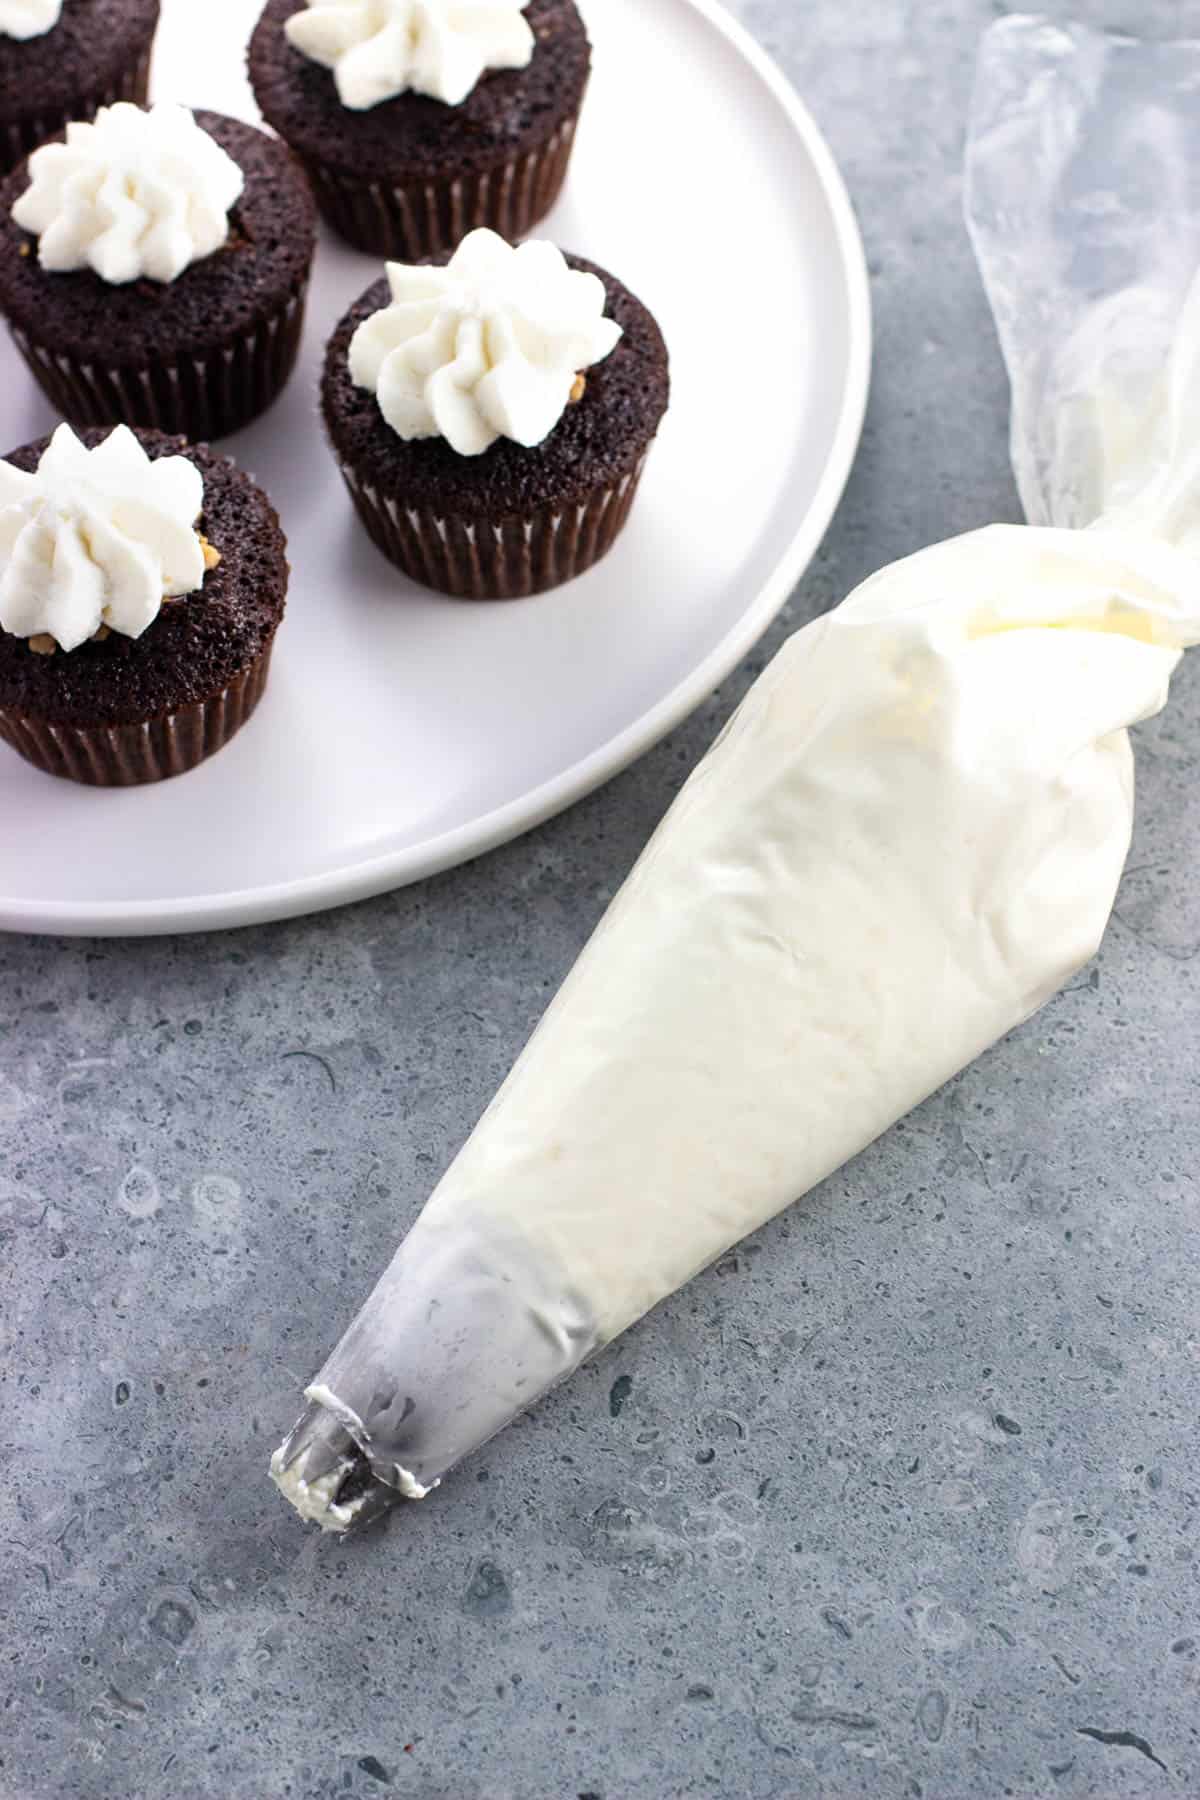 A full piping bag of whipped cream next to chocolate cupcakes dolloped with whipped cream.